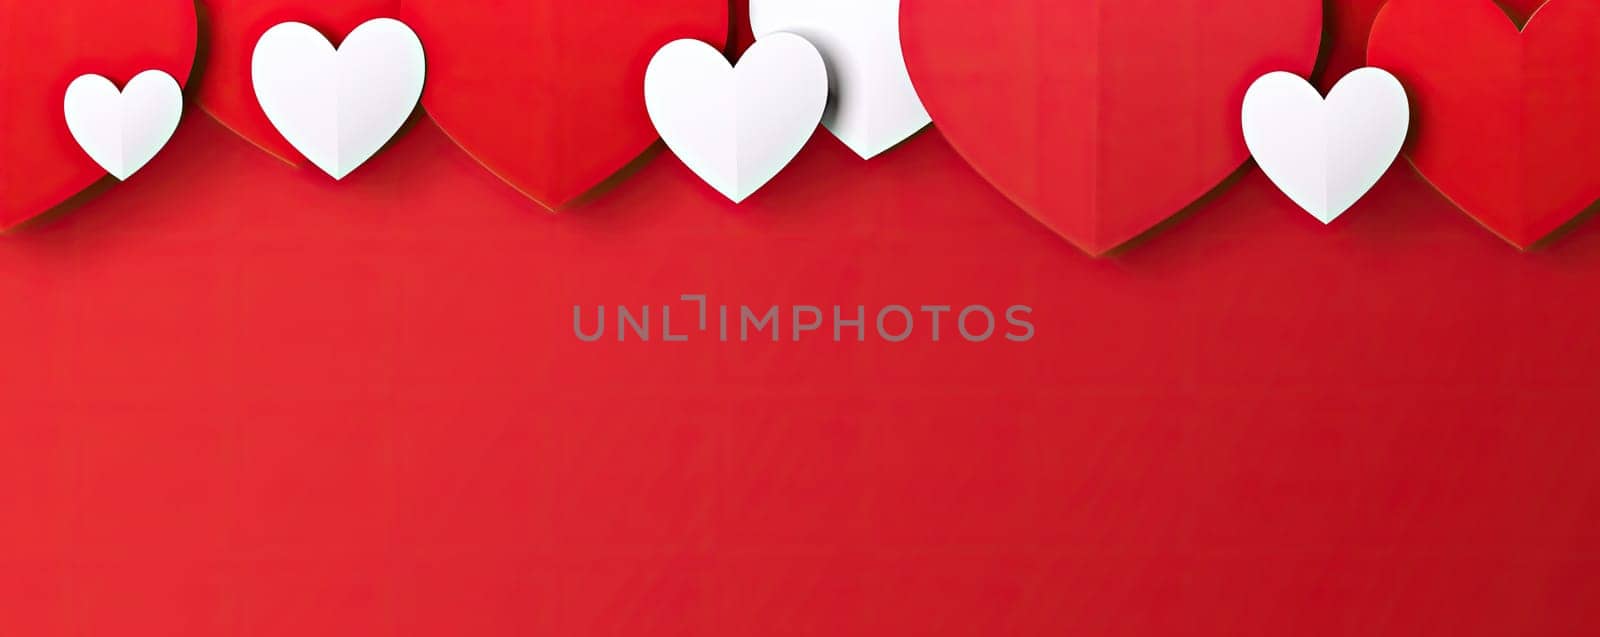 Symbol of love, red hearts on red background by Yurich32